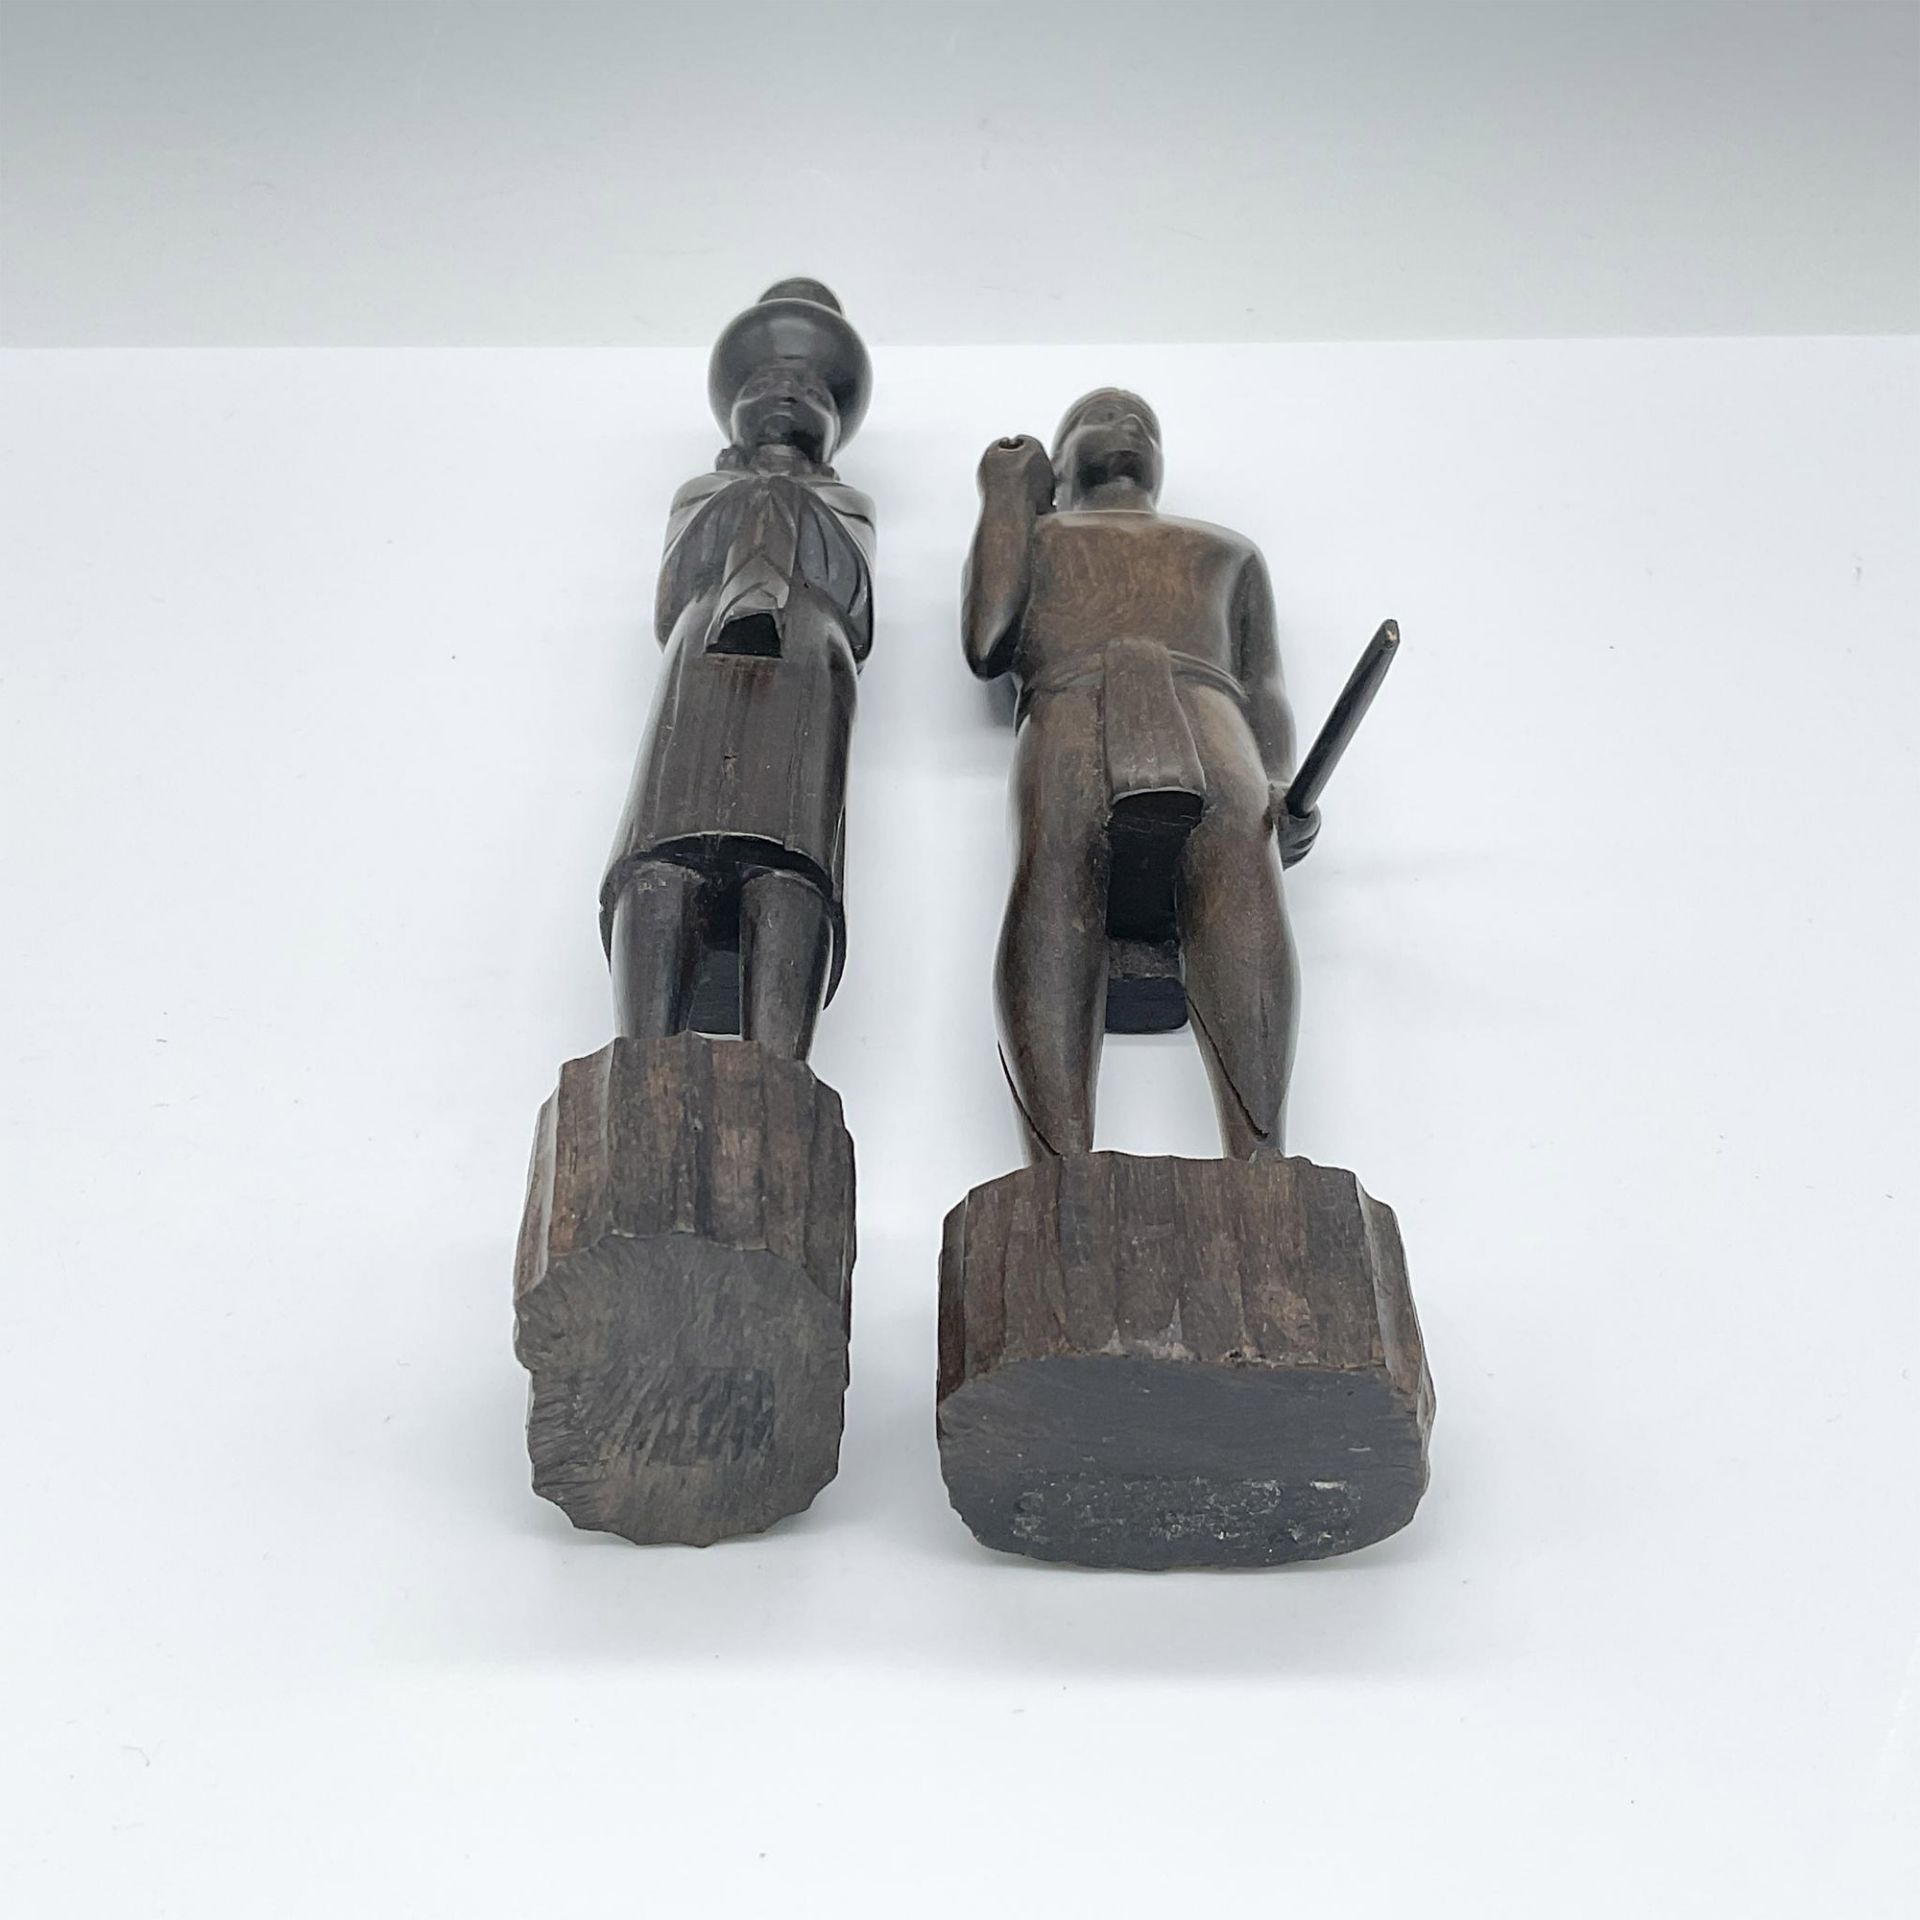 Pair of Wooden African Art Figures, Man and Woman - Image 3 of 4